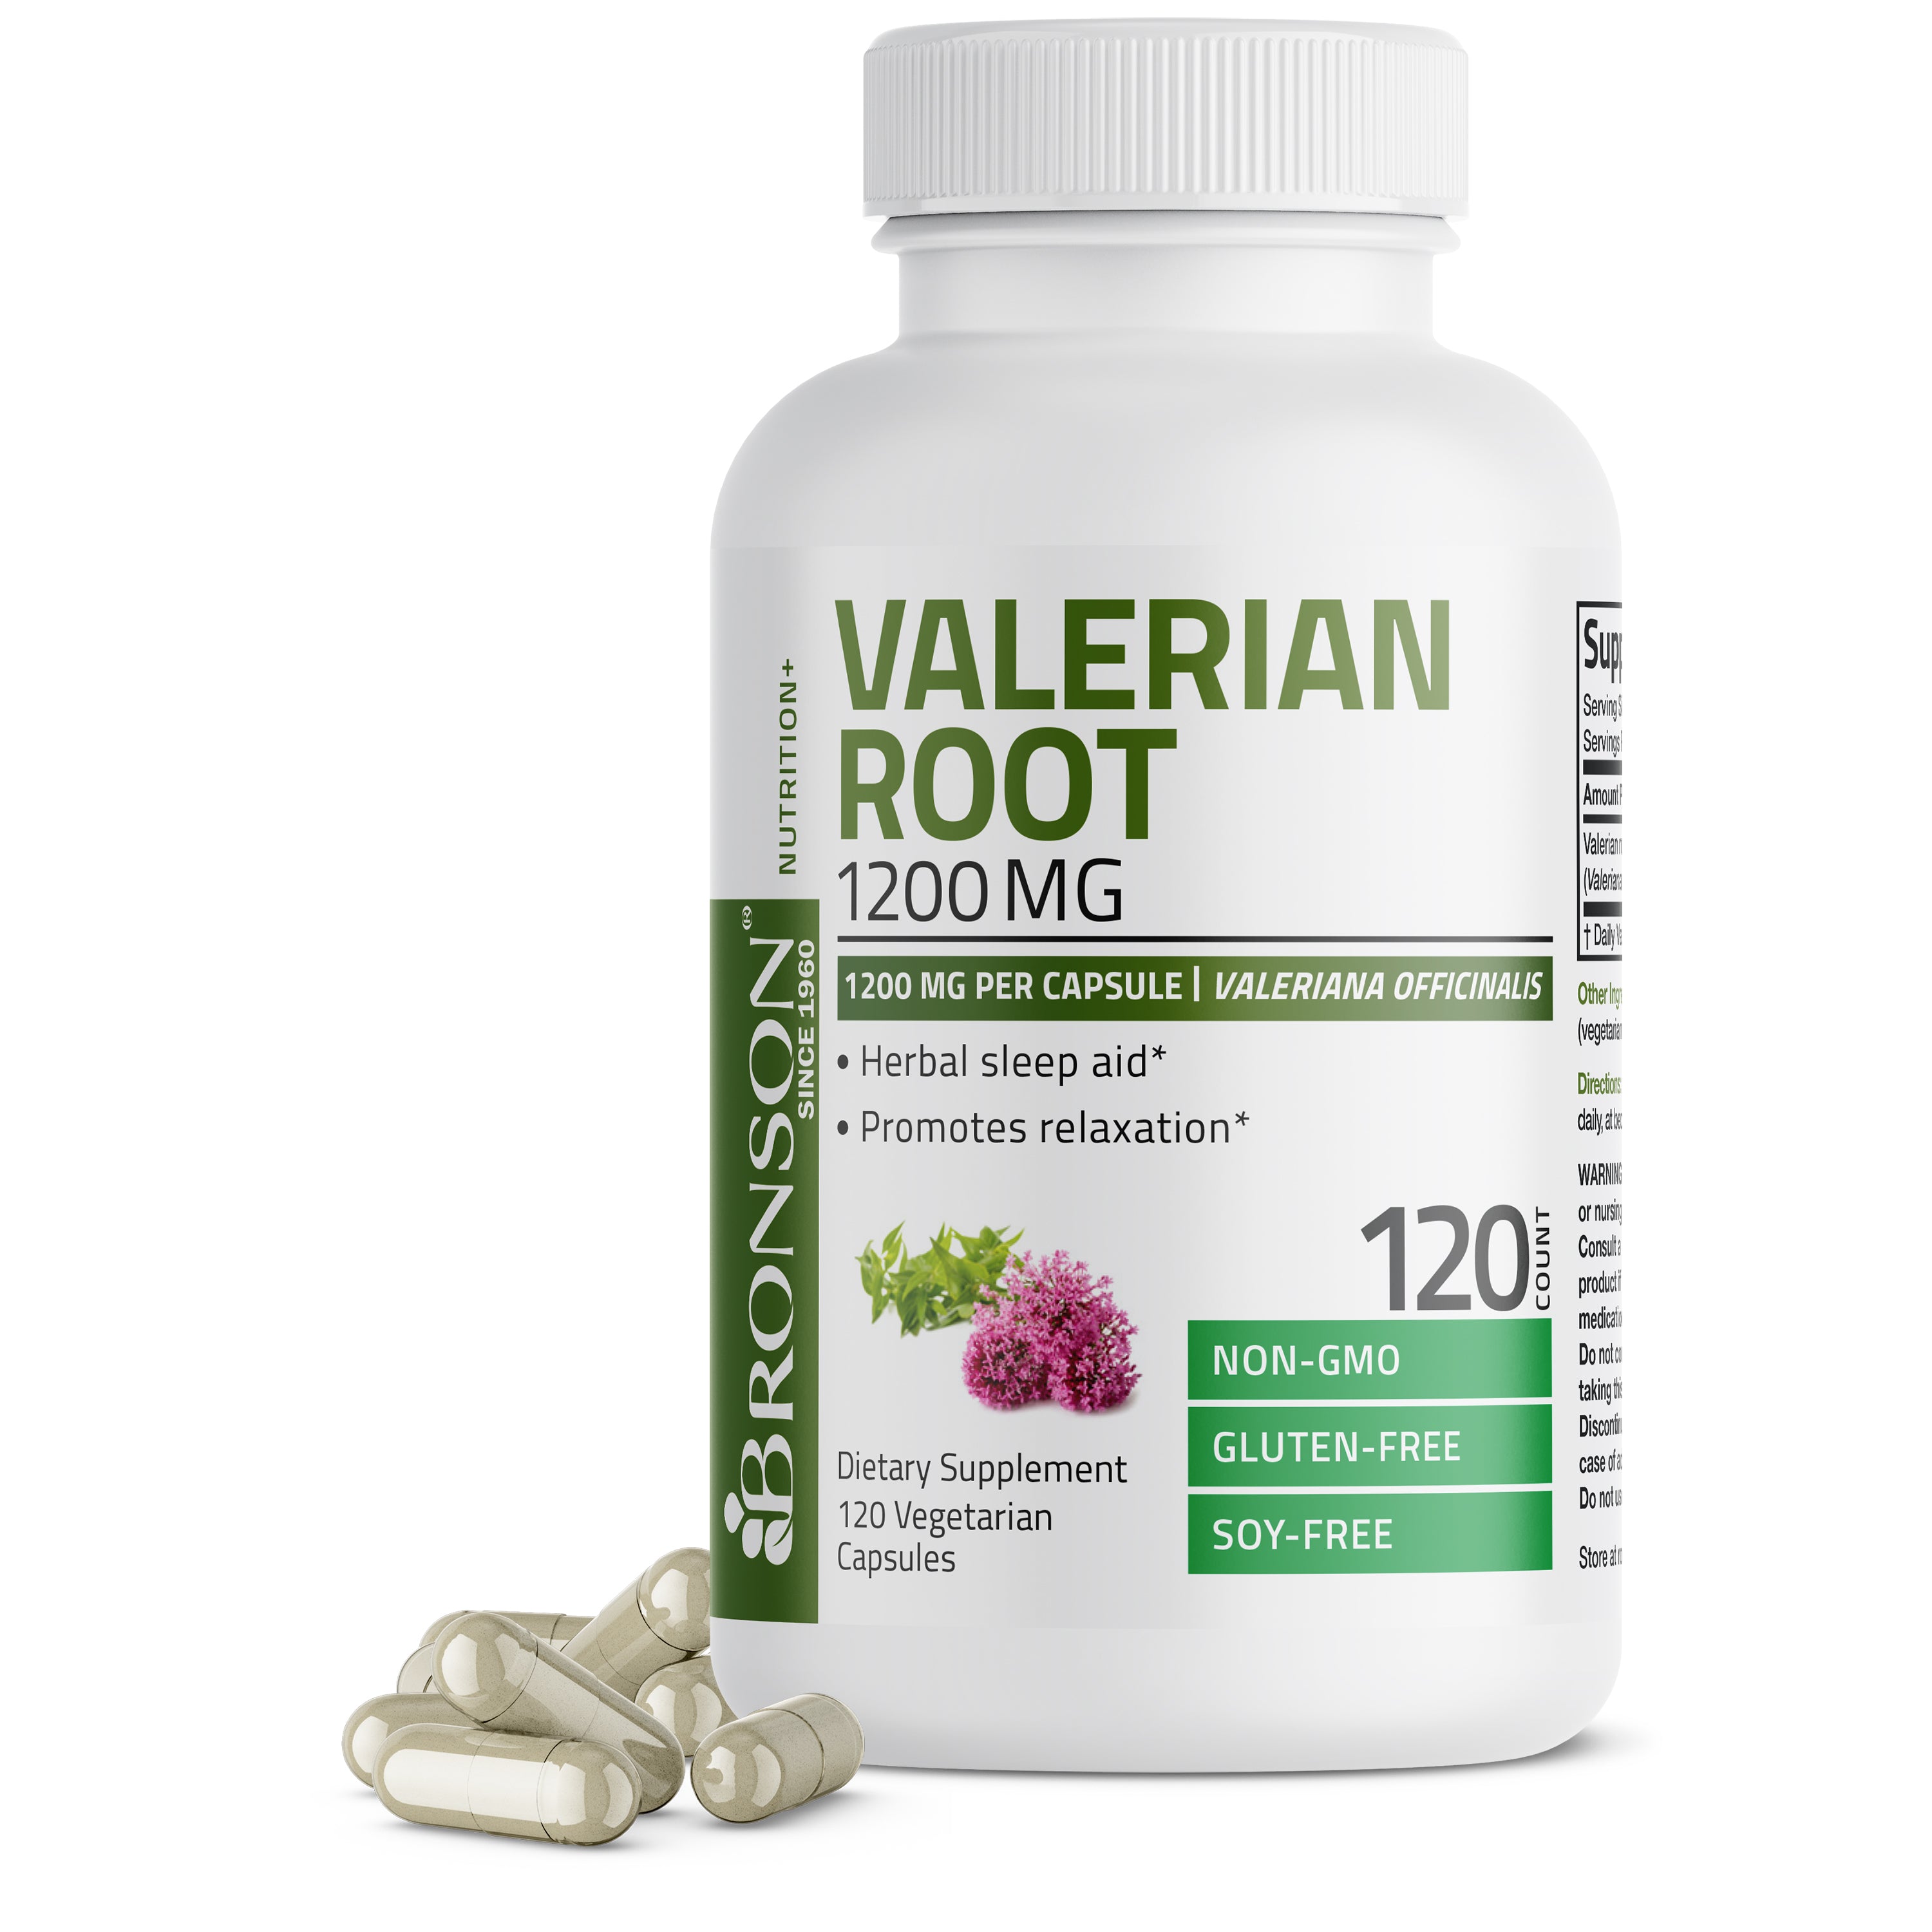 Valerian Root 1200 mg view 1 of 6